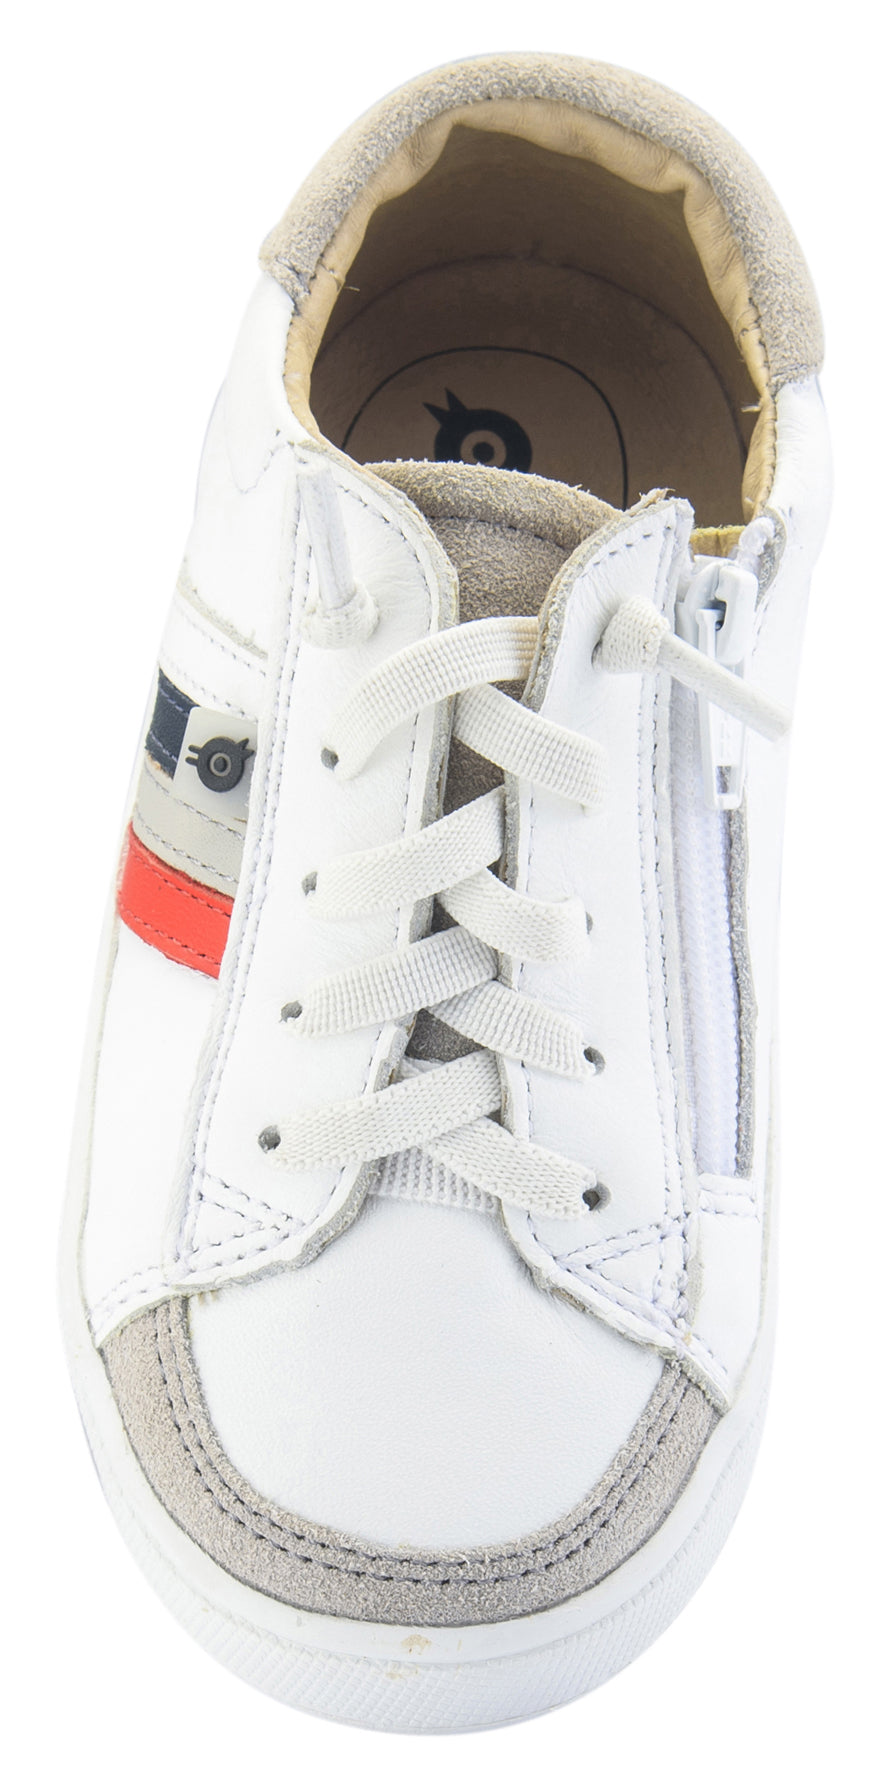 Old Soles Boy's Sneaky Sneakers, White/Red/Gris/Navy